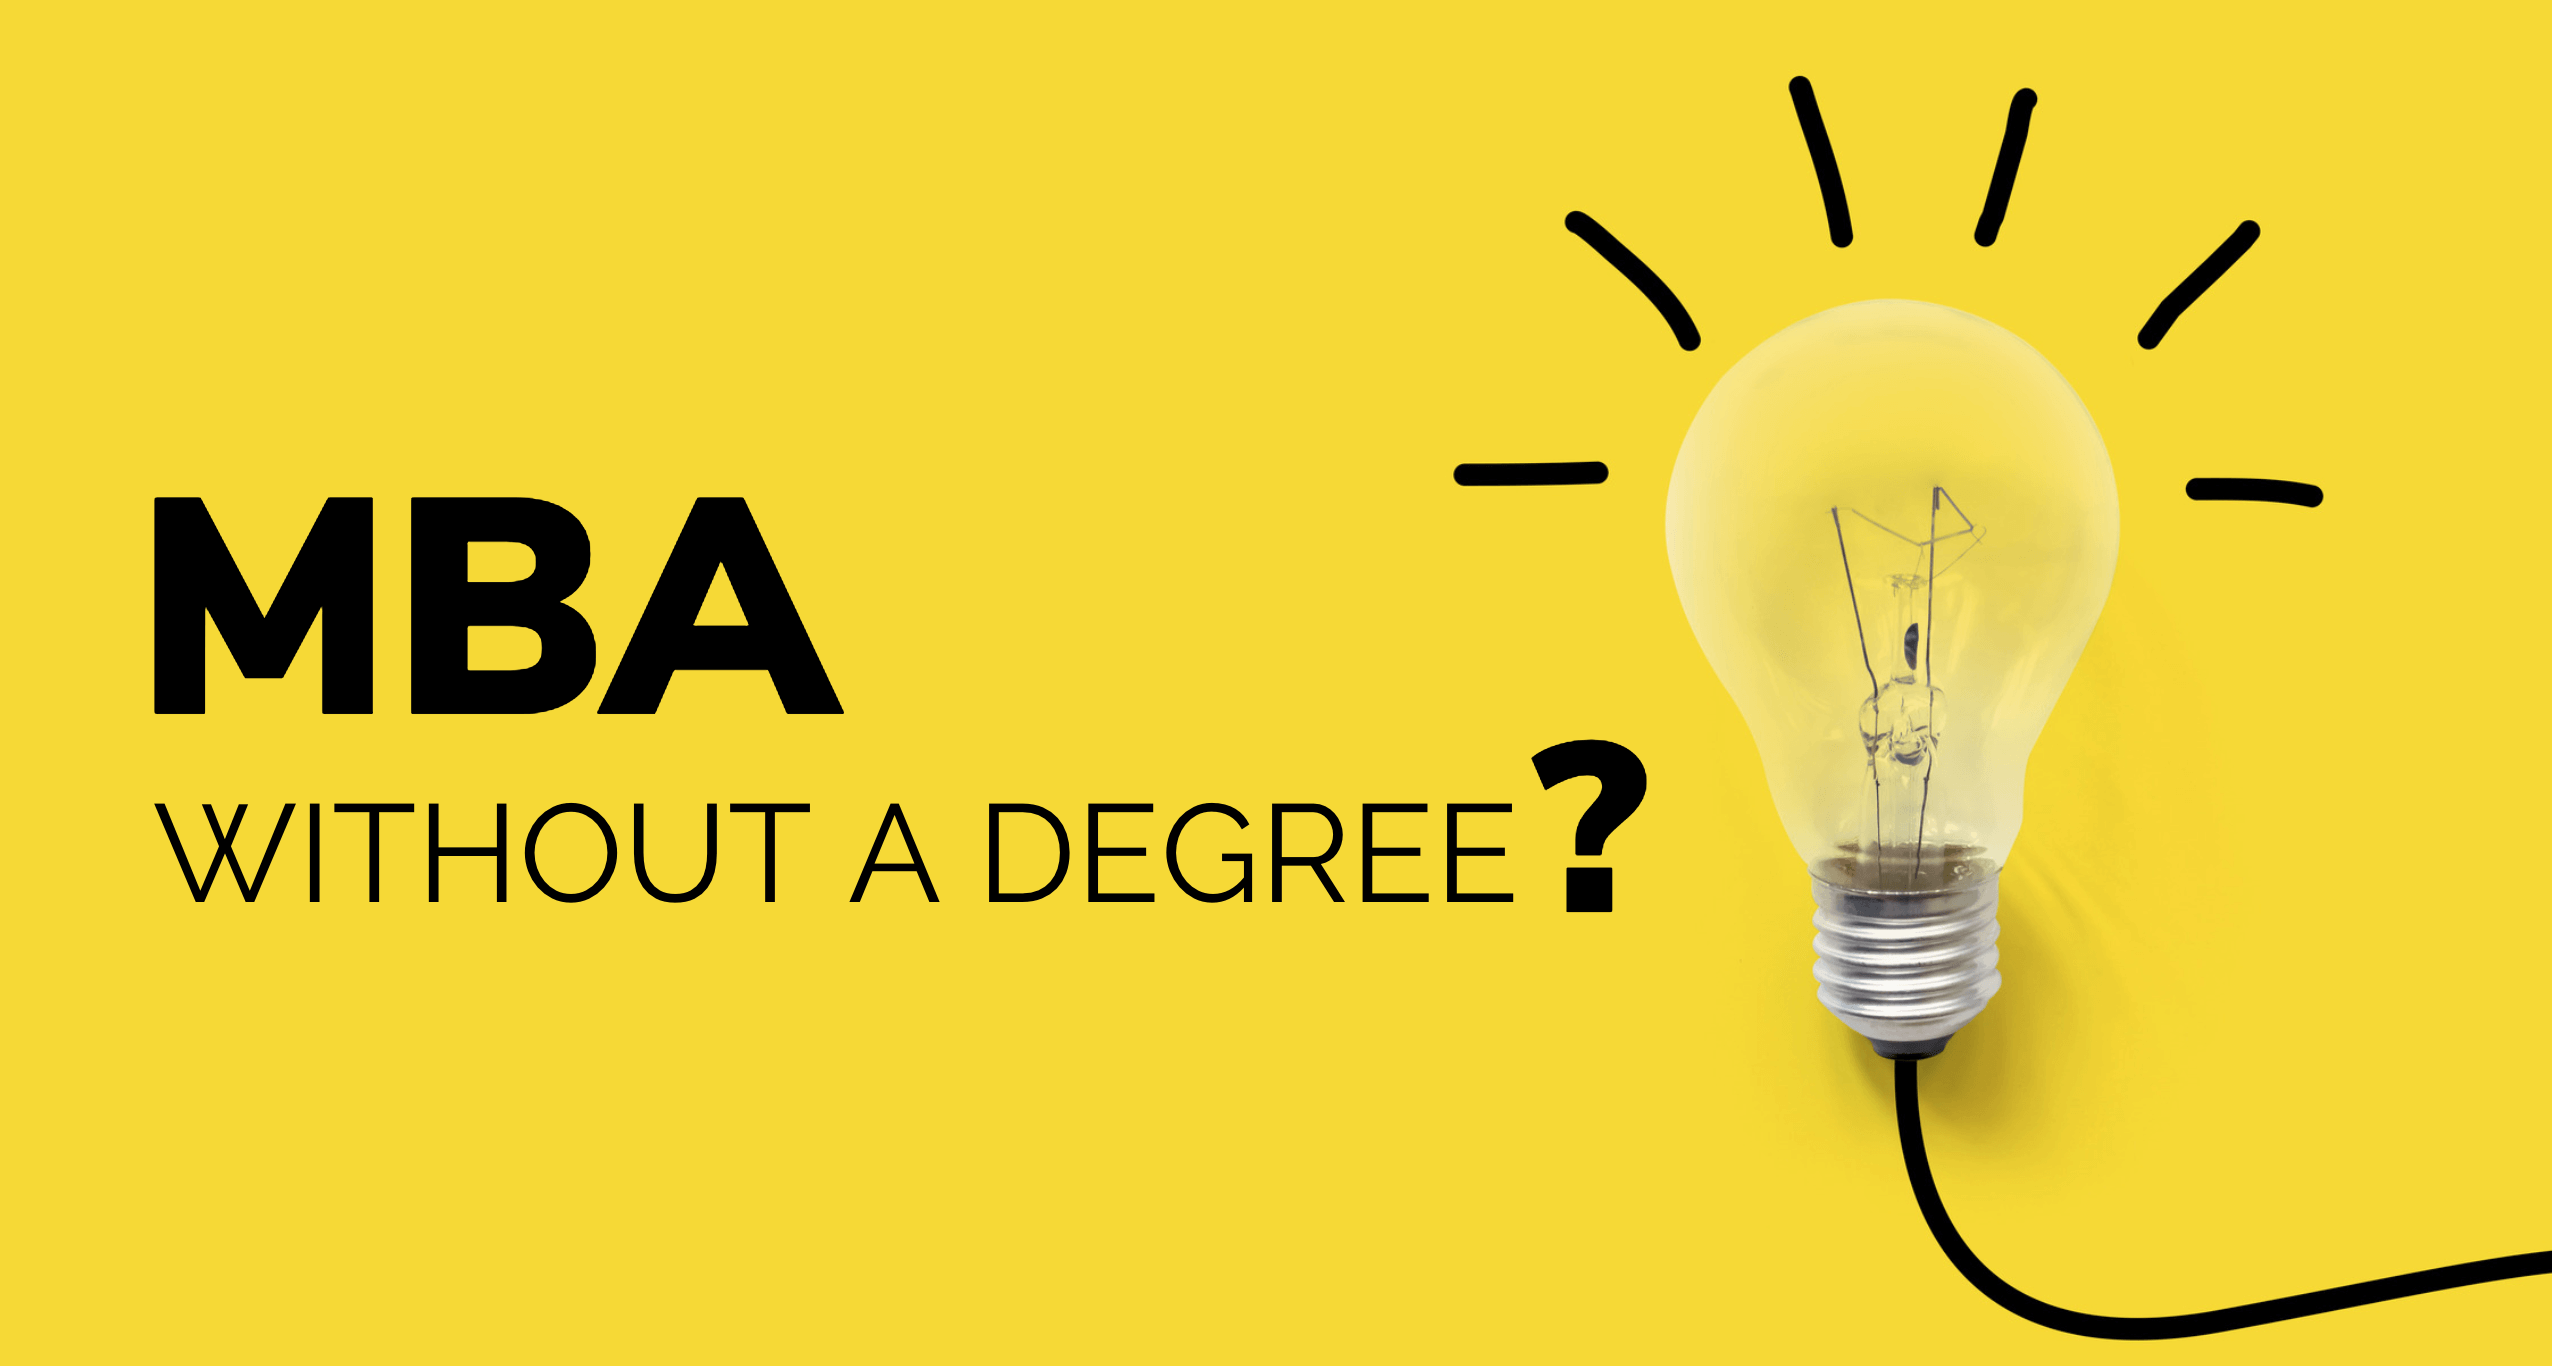 MBA without a Degree?